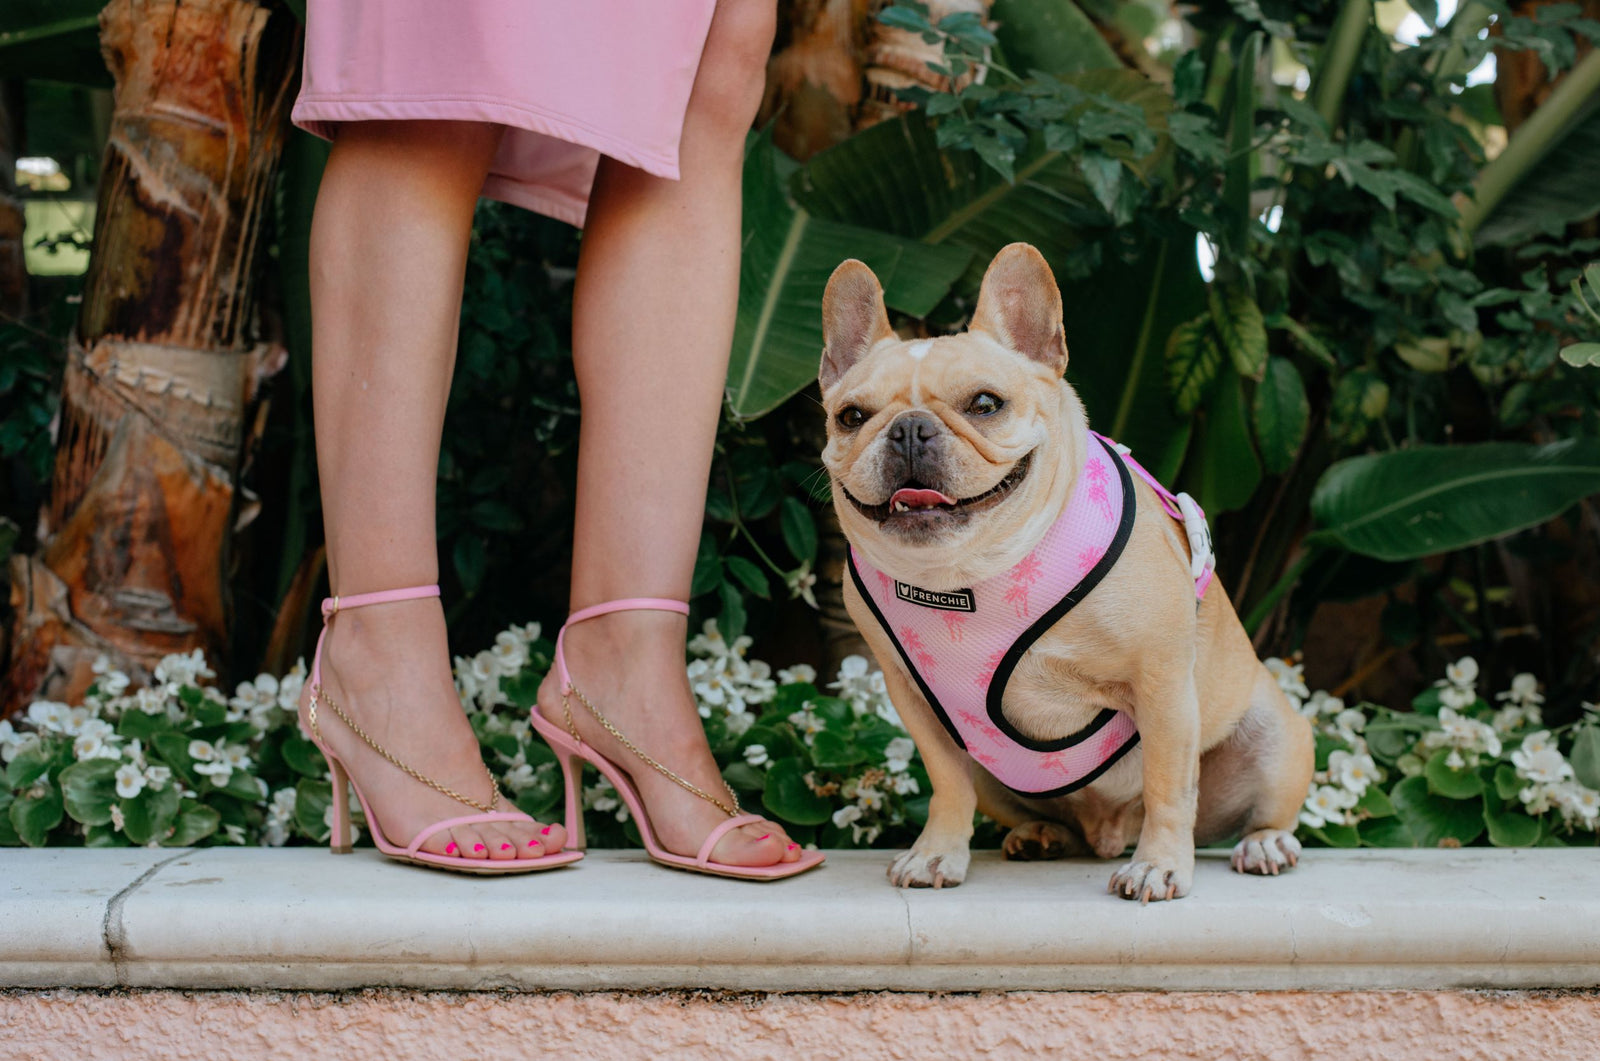 Frenchie History Lesson: The Origin of the French Bulldog